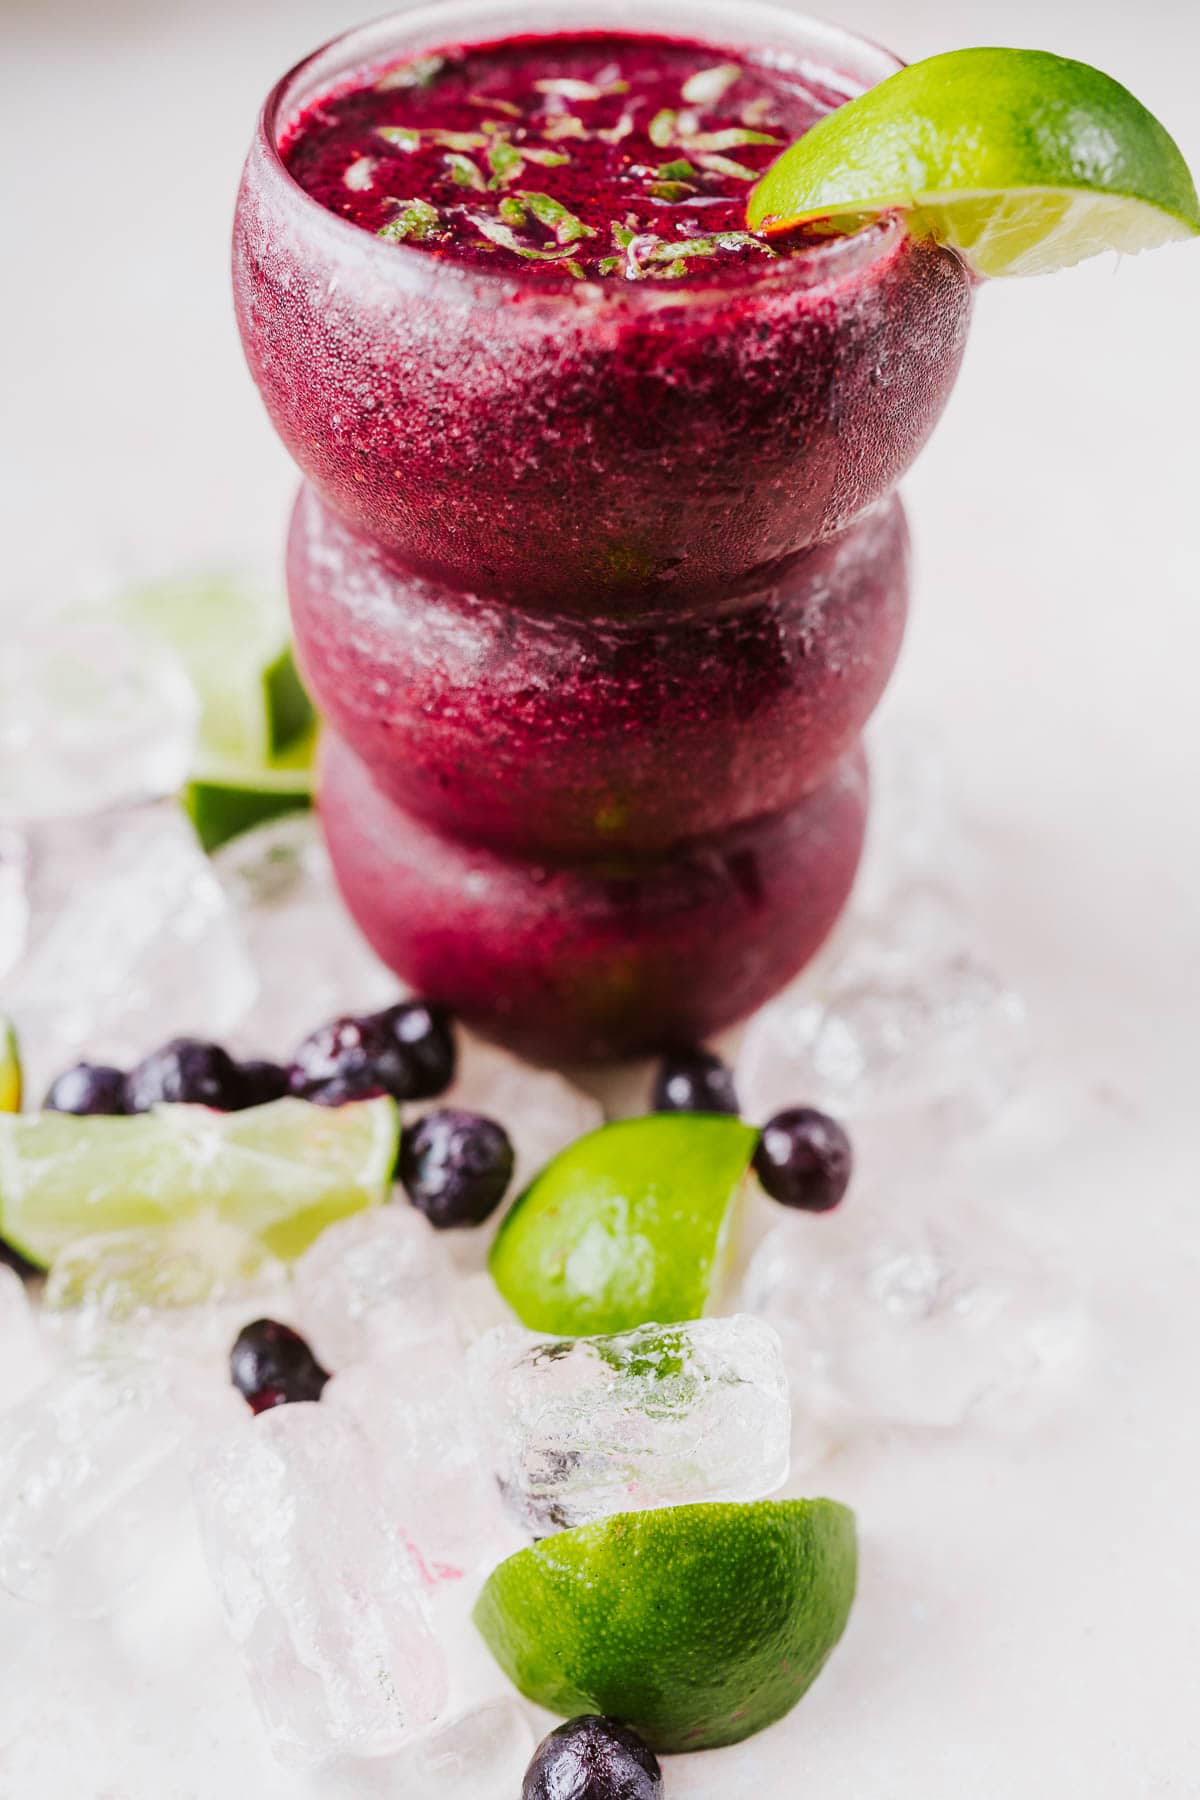 A tall clear glass filled with a homemade frozen mocktail garnished with lime.